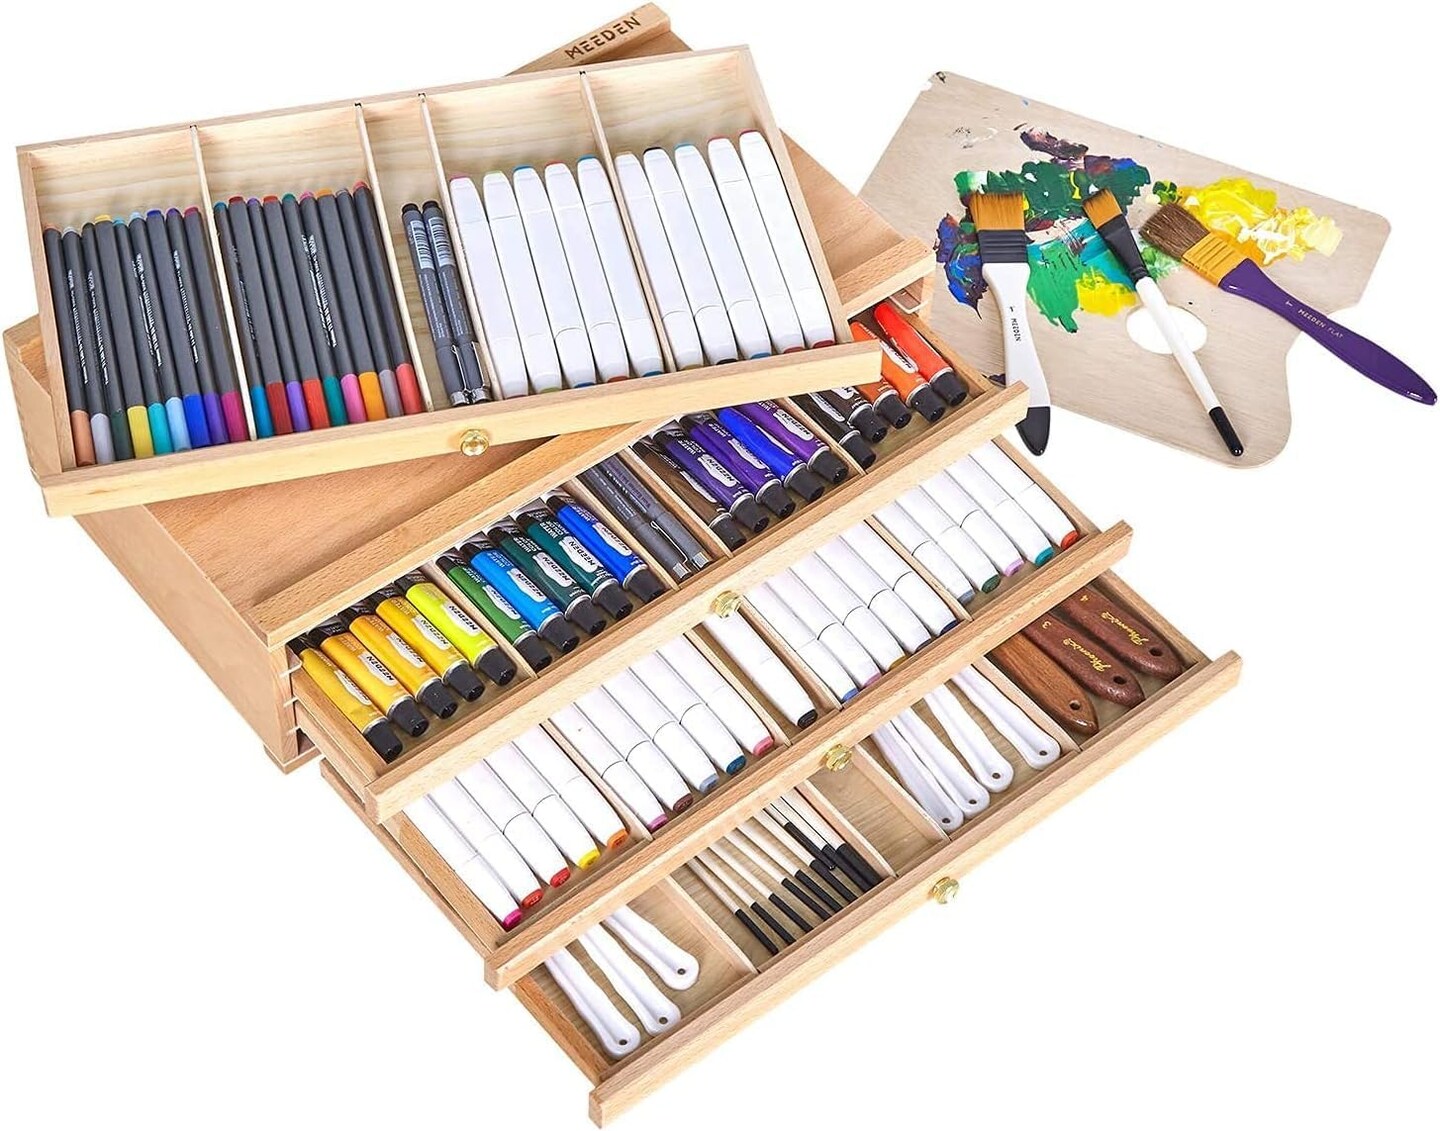 MEEDEN 10-Drawer Artist Supply Storage Box - Large Capacity Multi-Function Beech-Wood Pencil Box with Drawer &#x26; Compartments for Organizing Pastels, Pencils, Pens, Markers, Brushes &#x26; Stamp